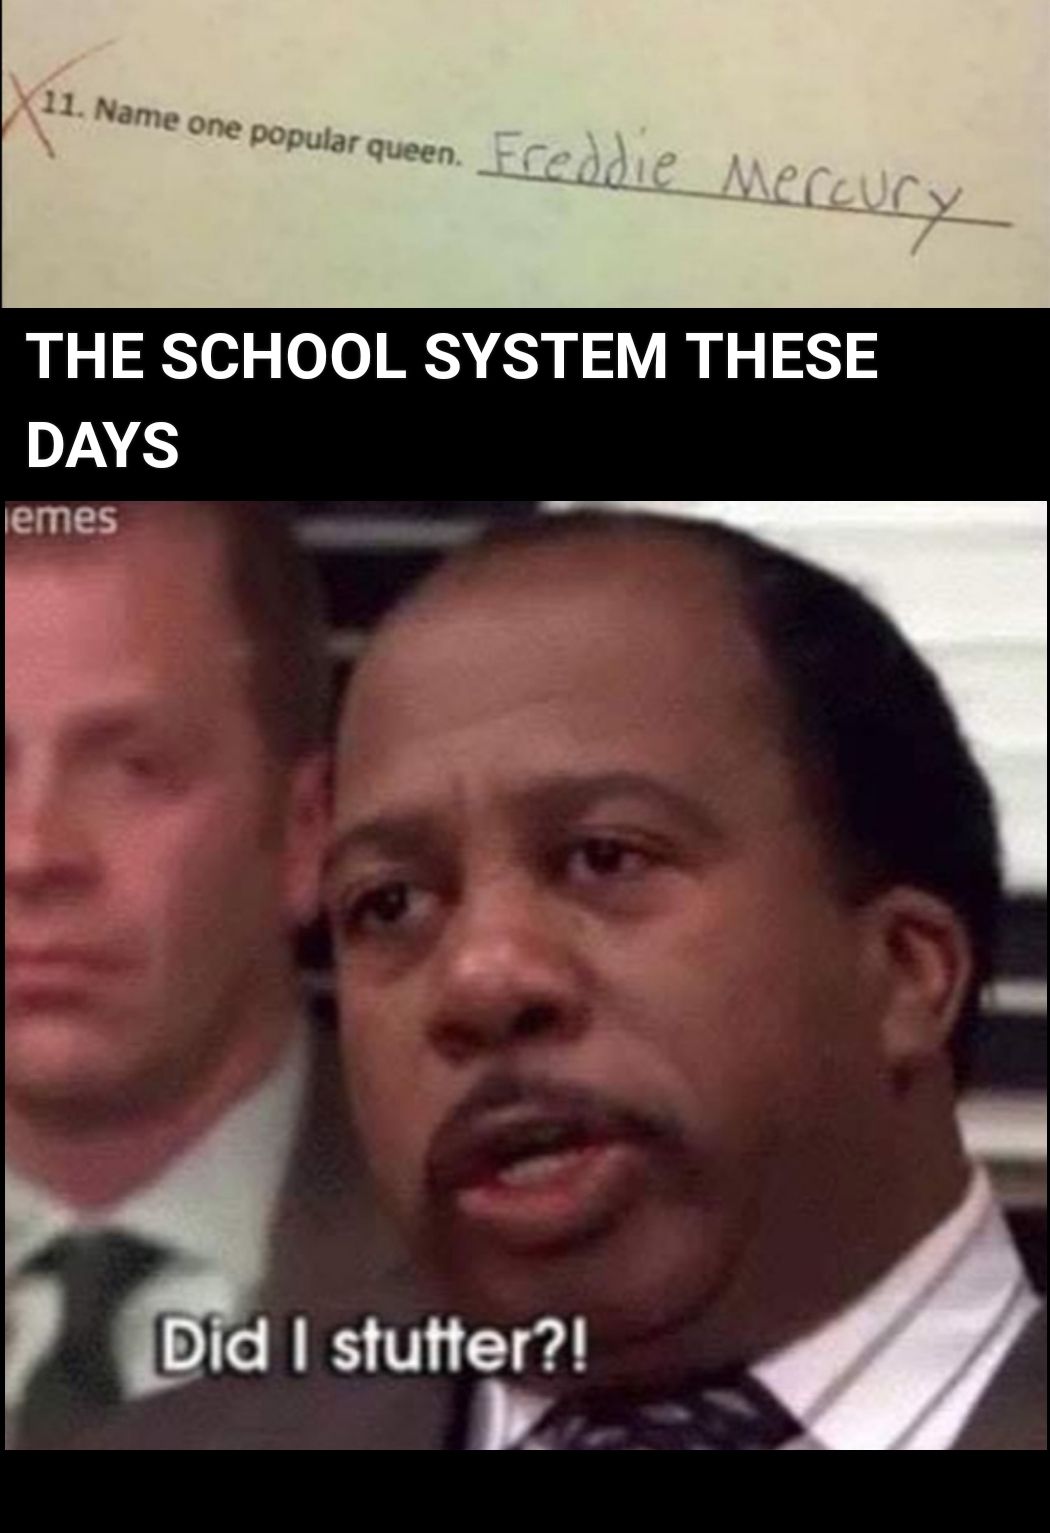 The school system these days